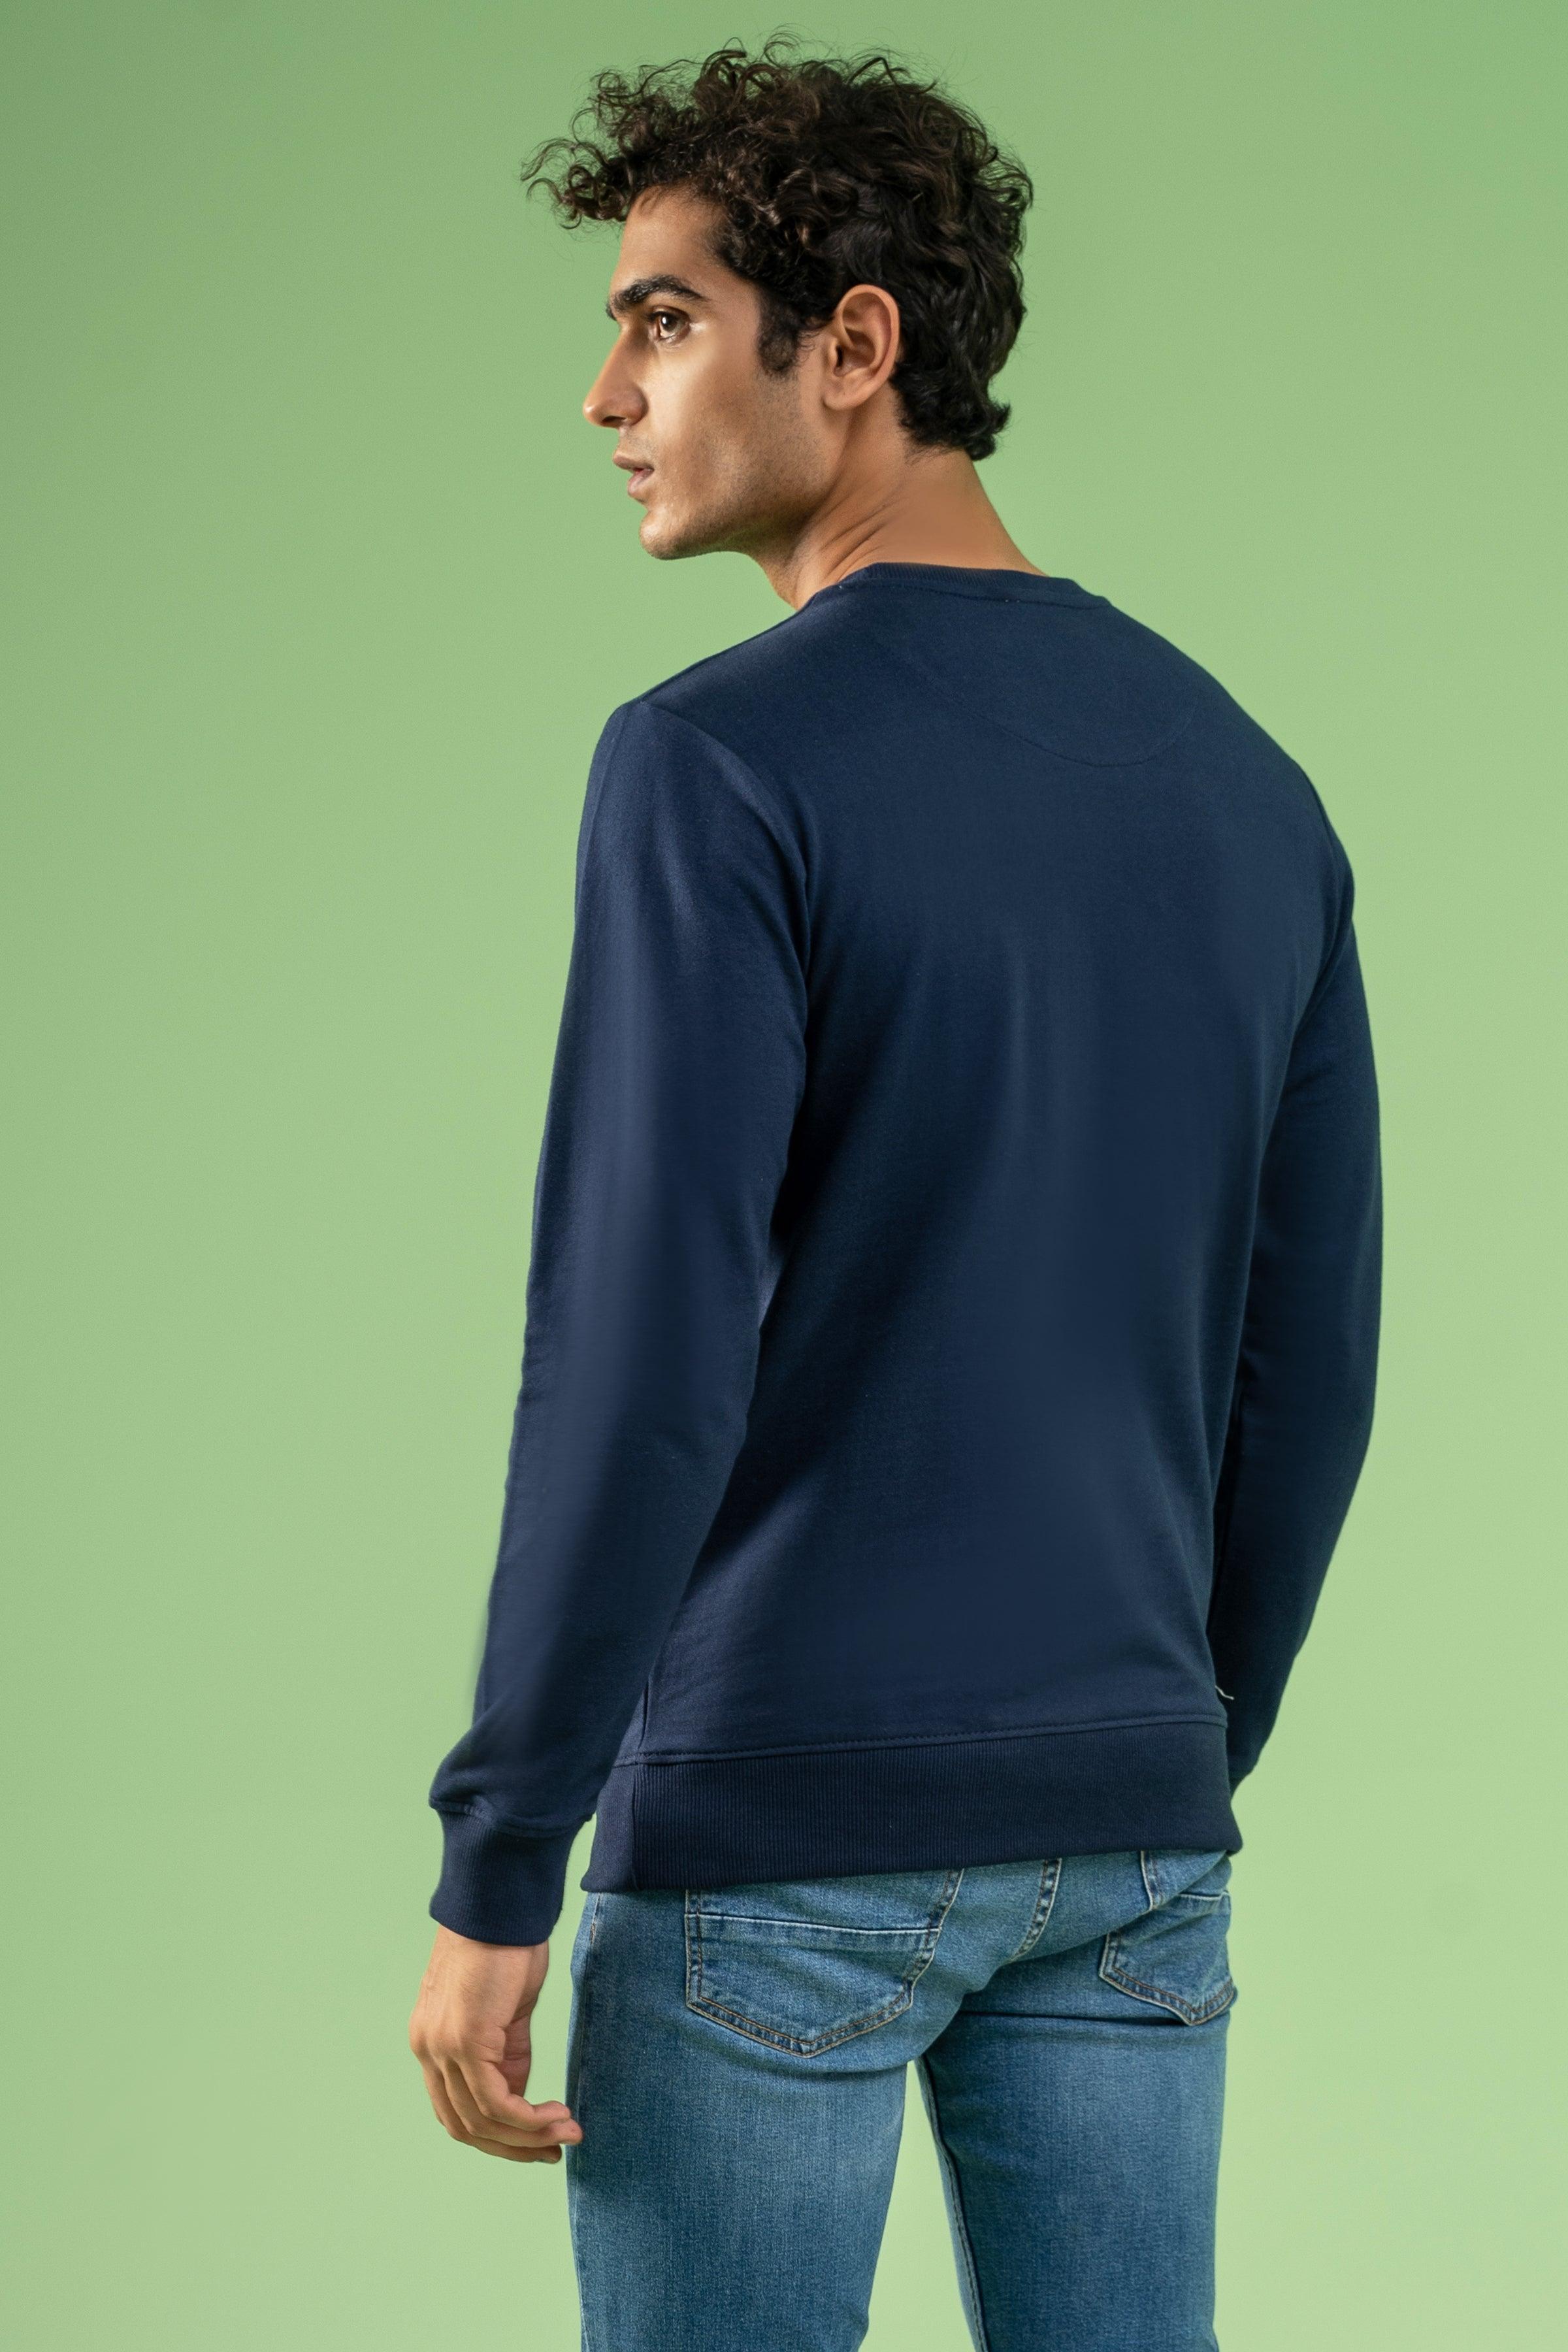 TERRY SWEAT SHIRT NAVY at Charcoal Clothing